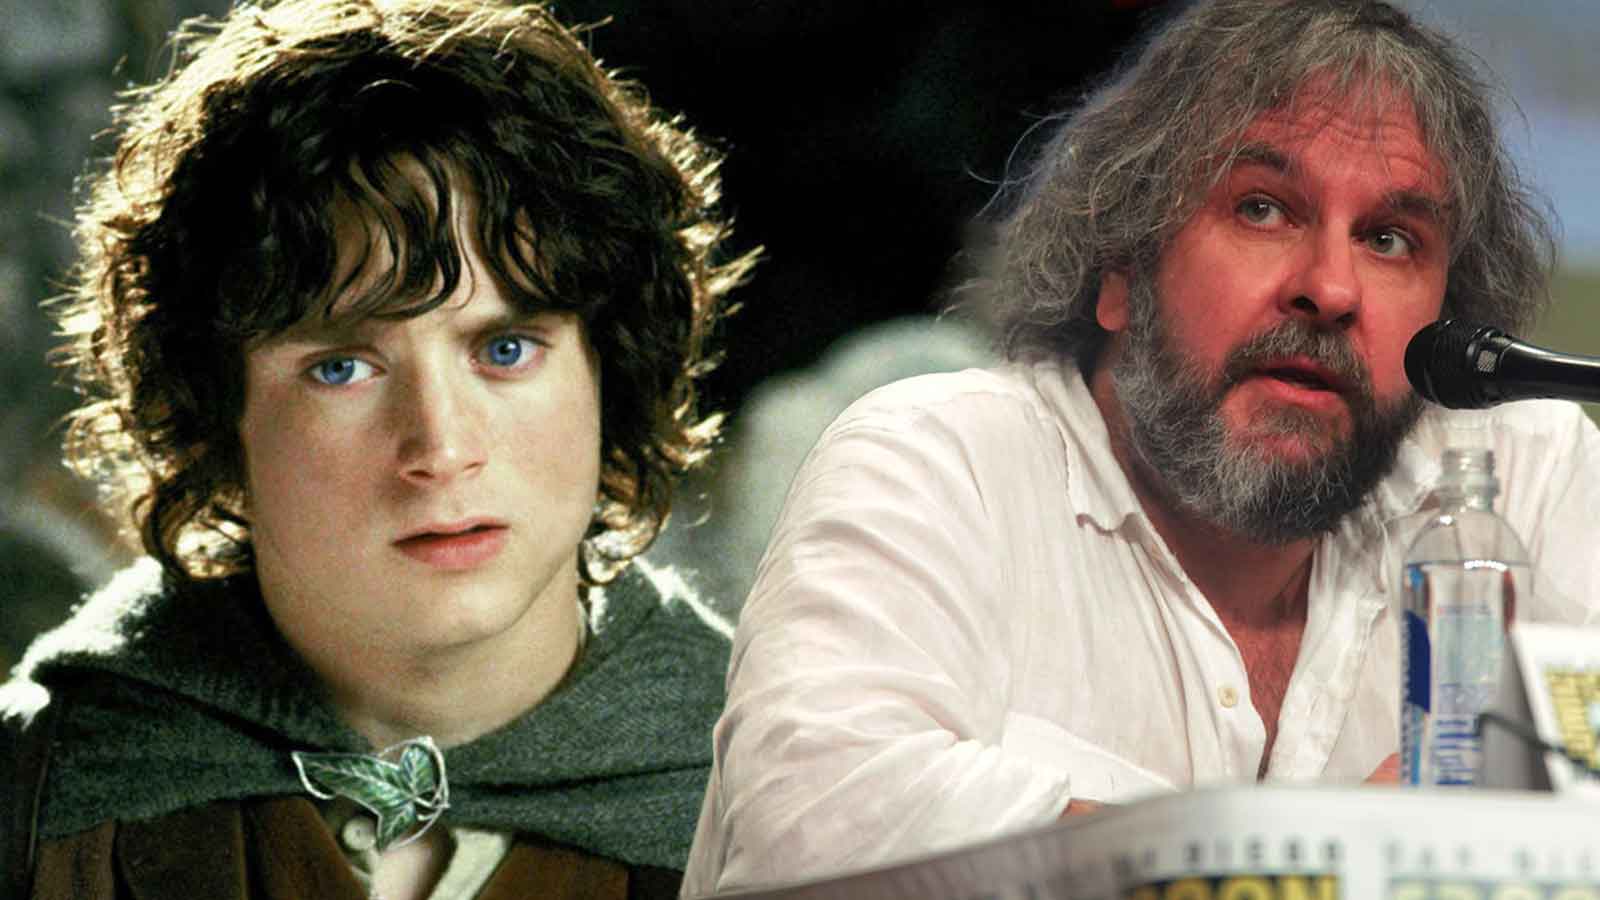 “F**k him”: Peter Jackson Modeled a Disgusting Lord of the Rings Orc After Harvey Weinstein, Confirms Elijah Wood